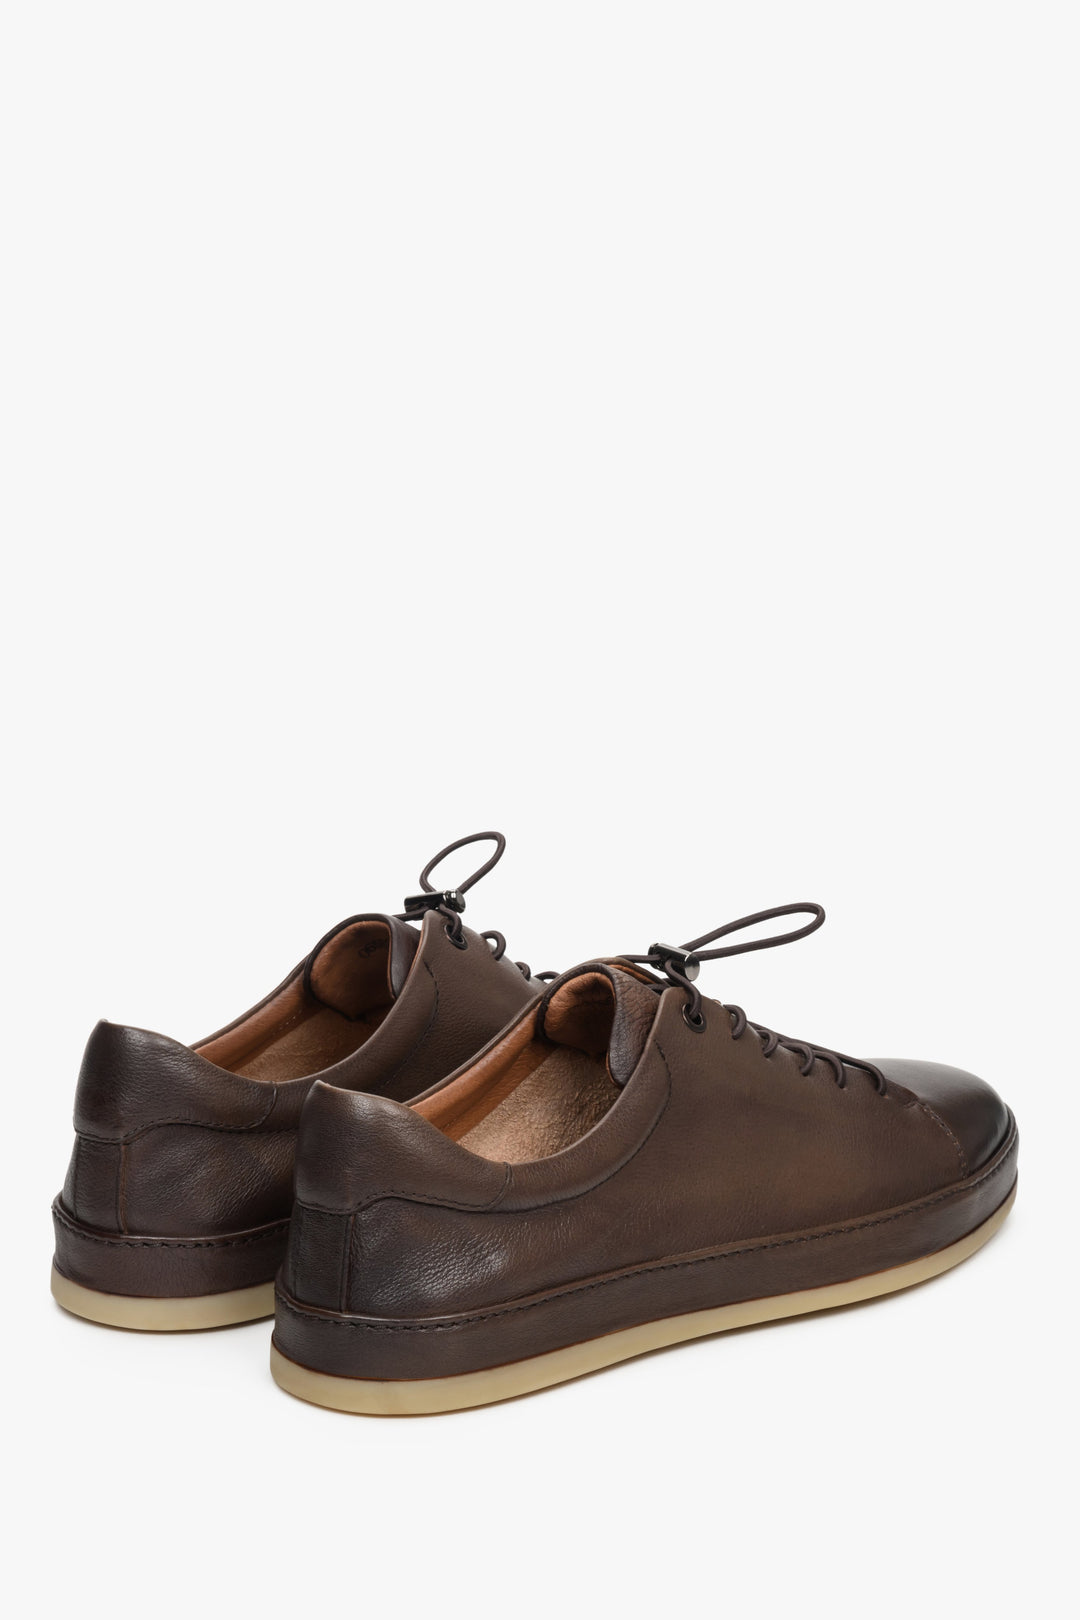 Men's Estro leather sneakers in brown - presentation of the heel and side seam of the shoes.